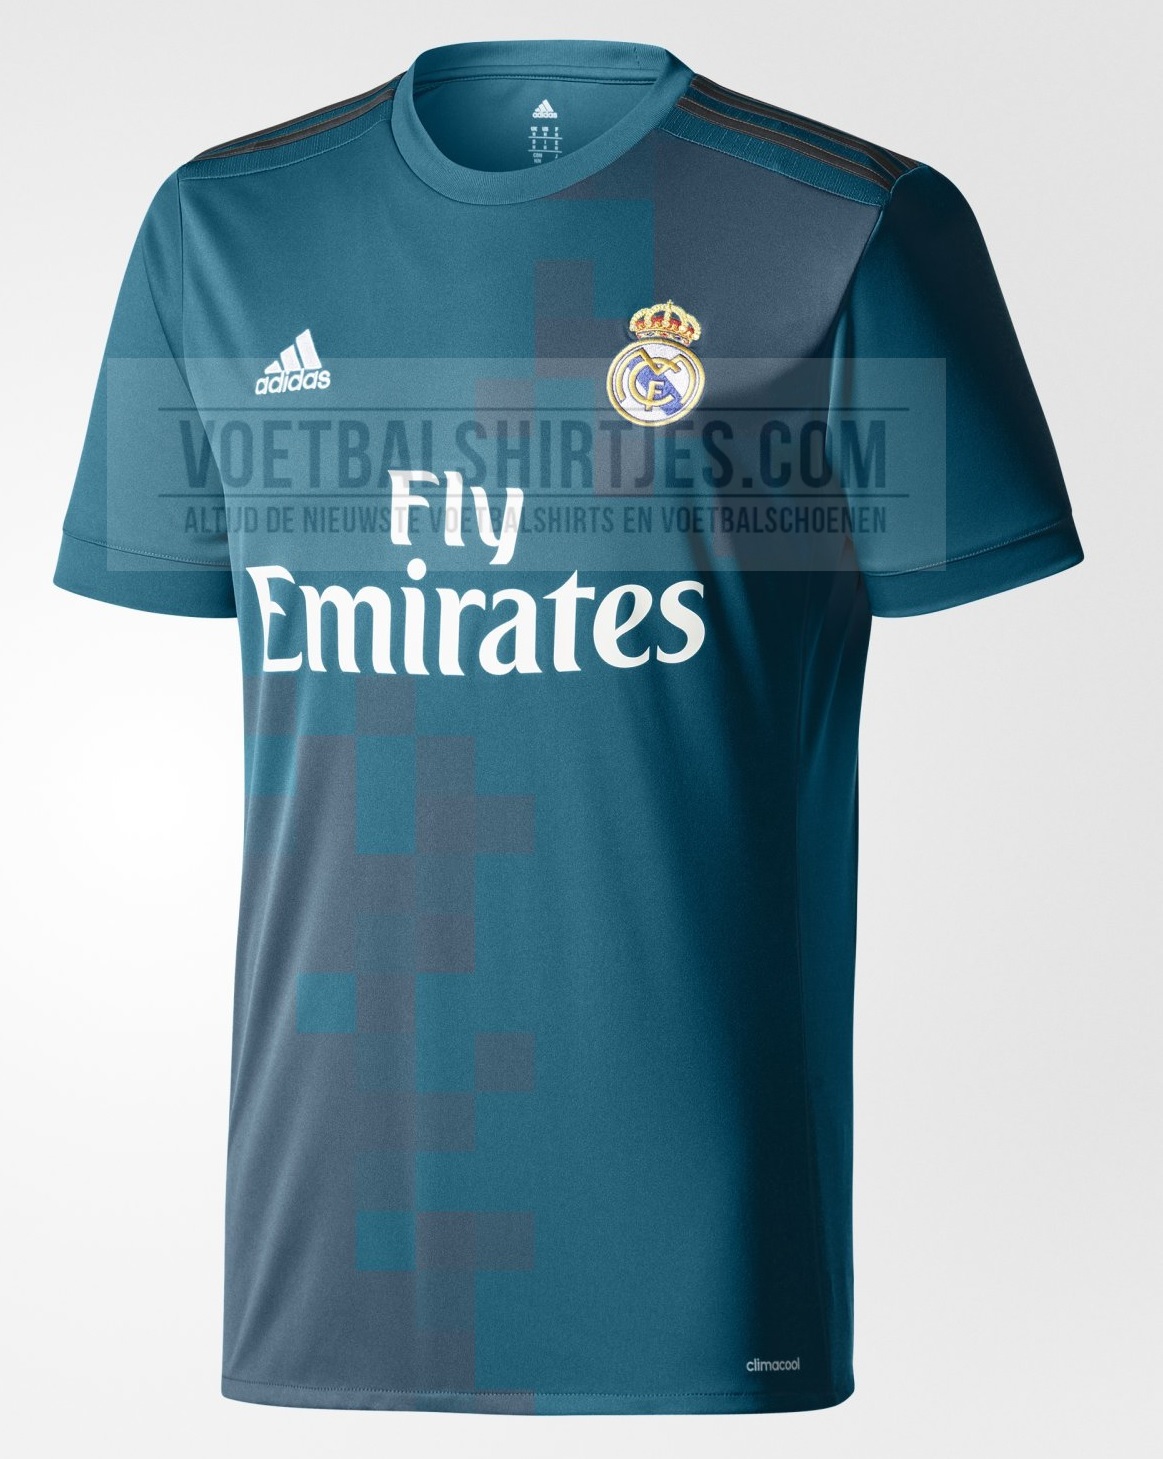 Historicus Actief Arne Real Madrid UCL 17/18 3rd kit - Real Madrid third kit - Real Madrid uitshirt  2018